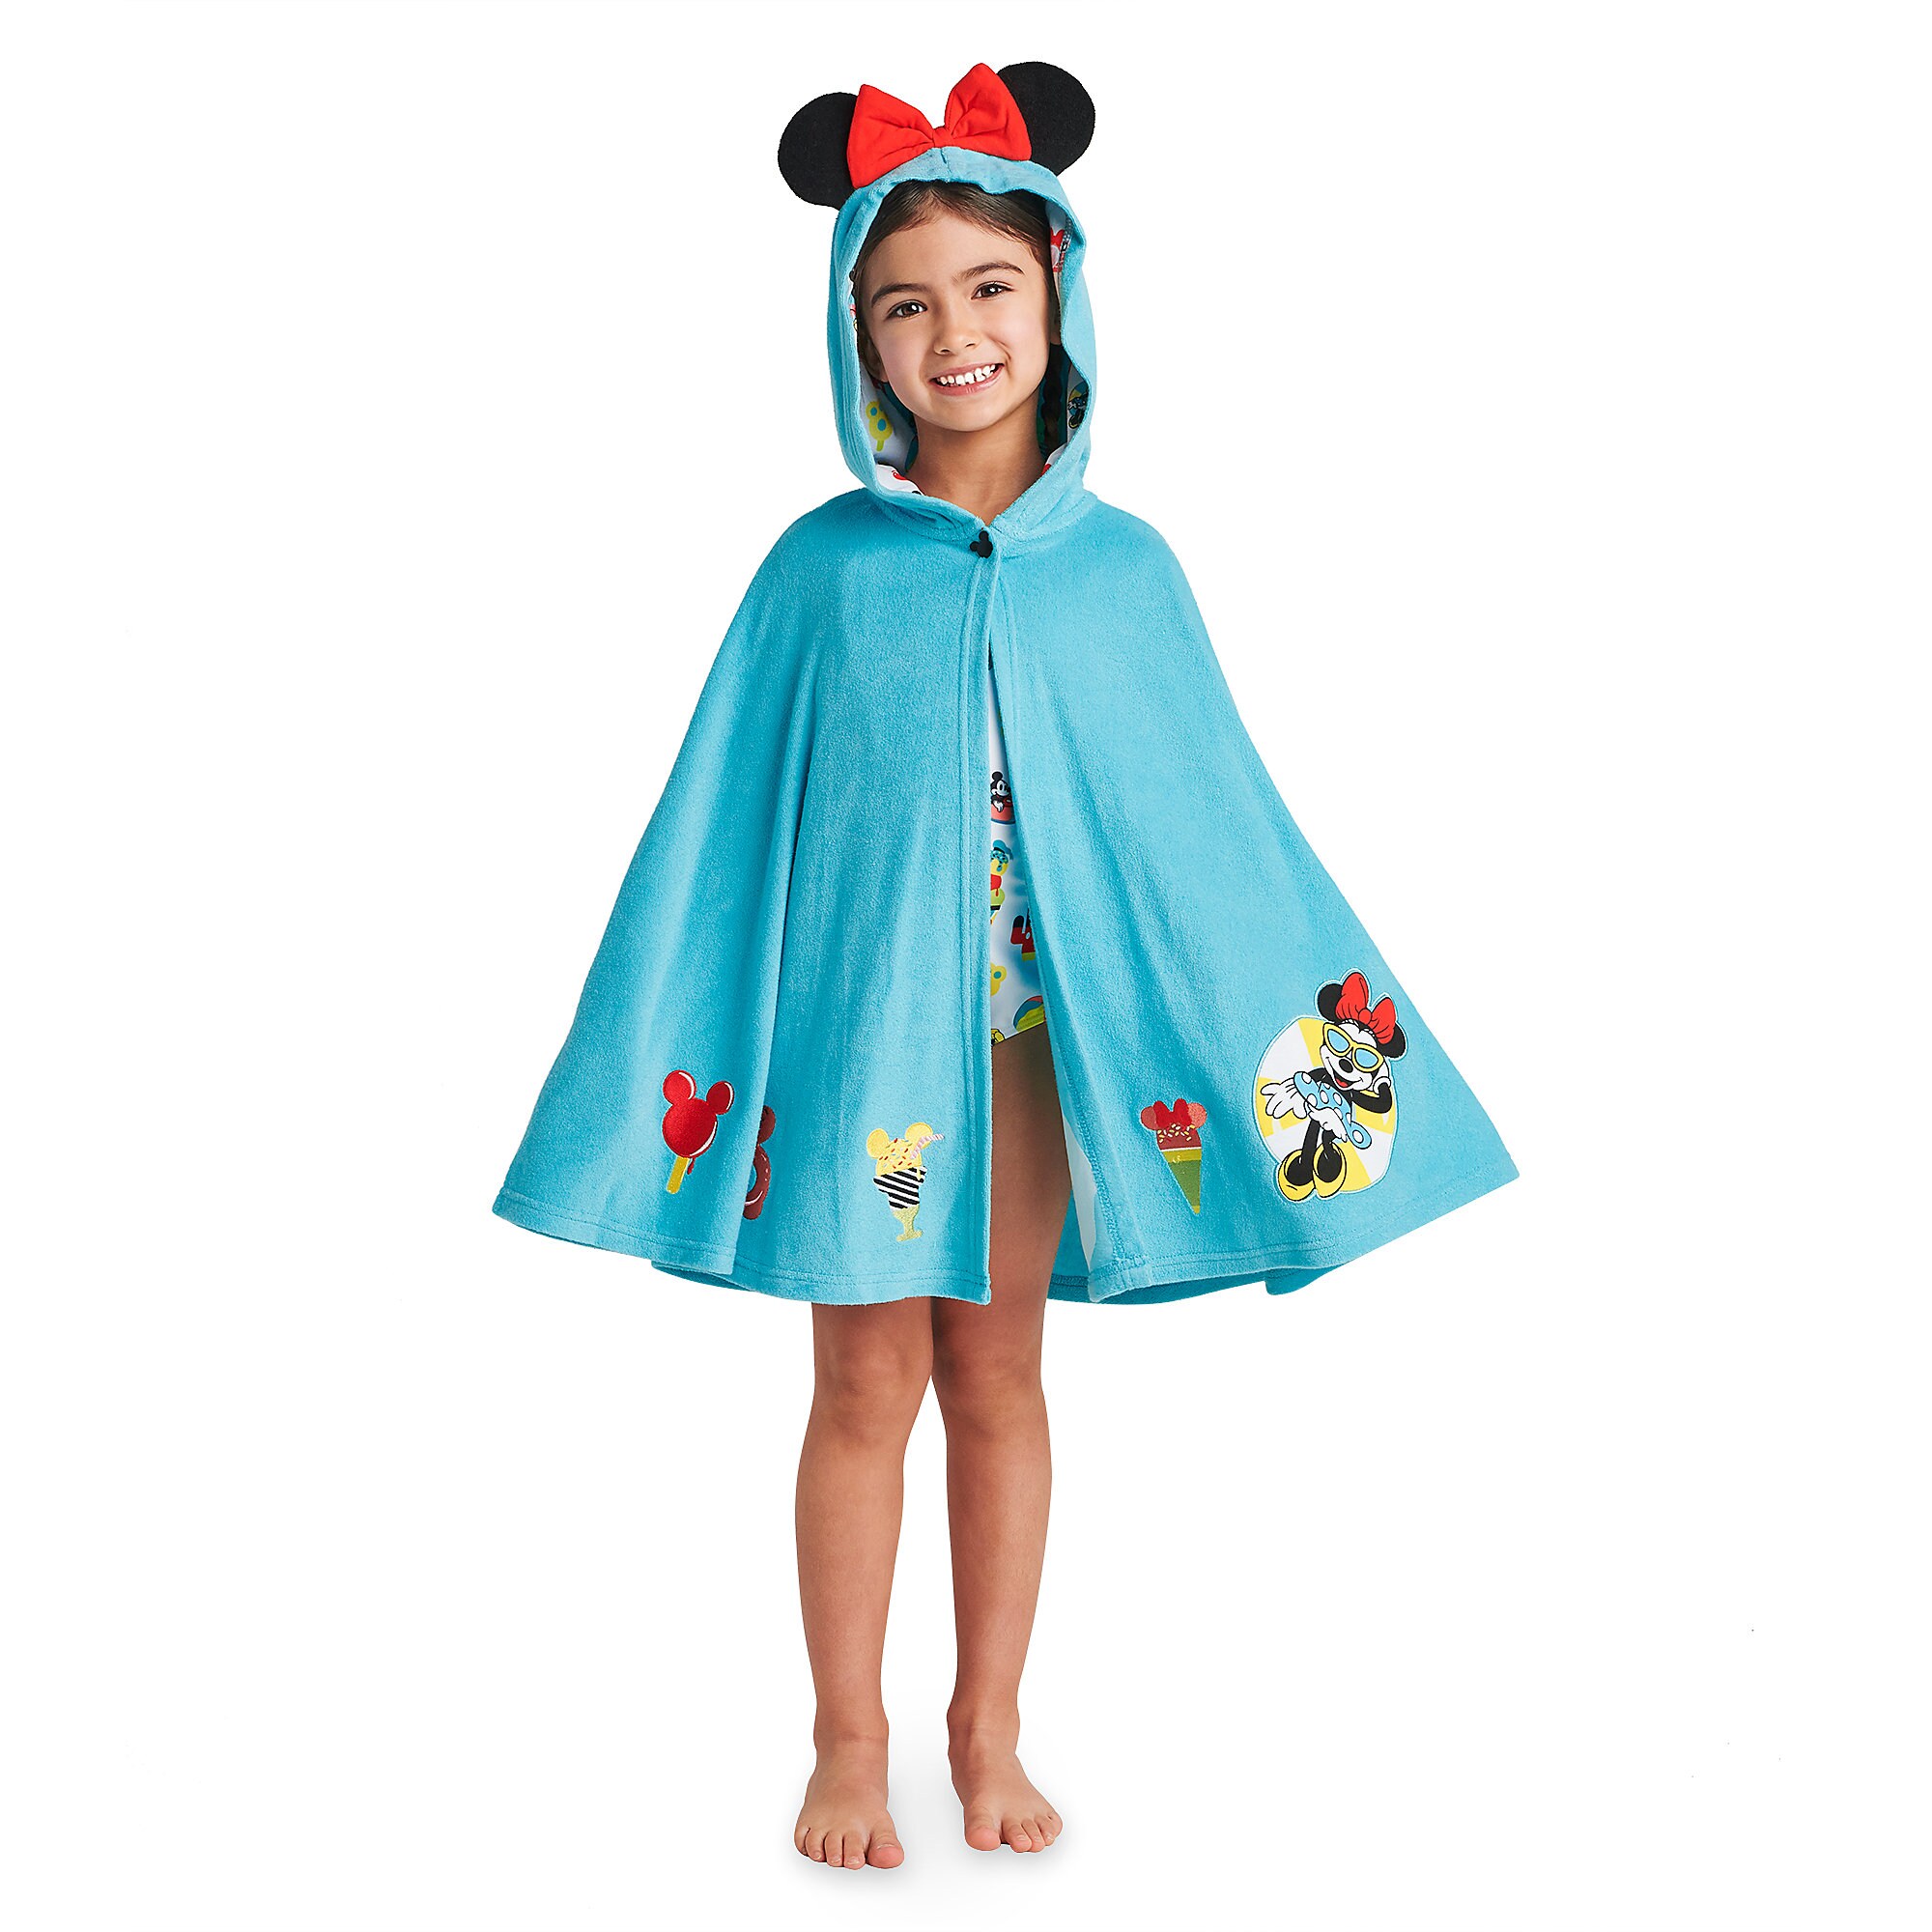 Minnie Mouse Summer Fun Swim Cover-Up for Girls - Personalized